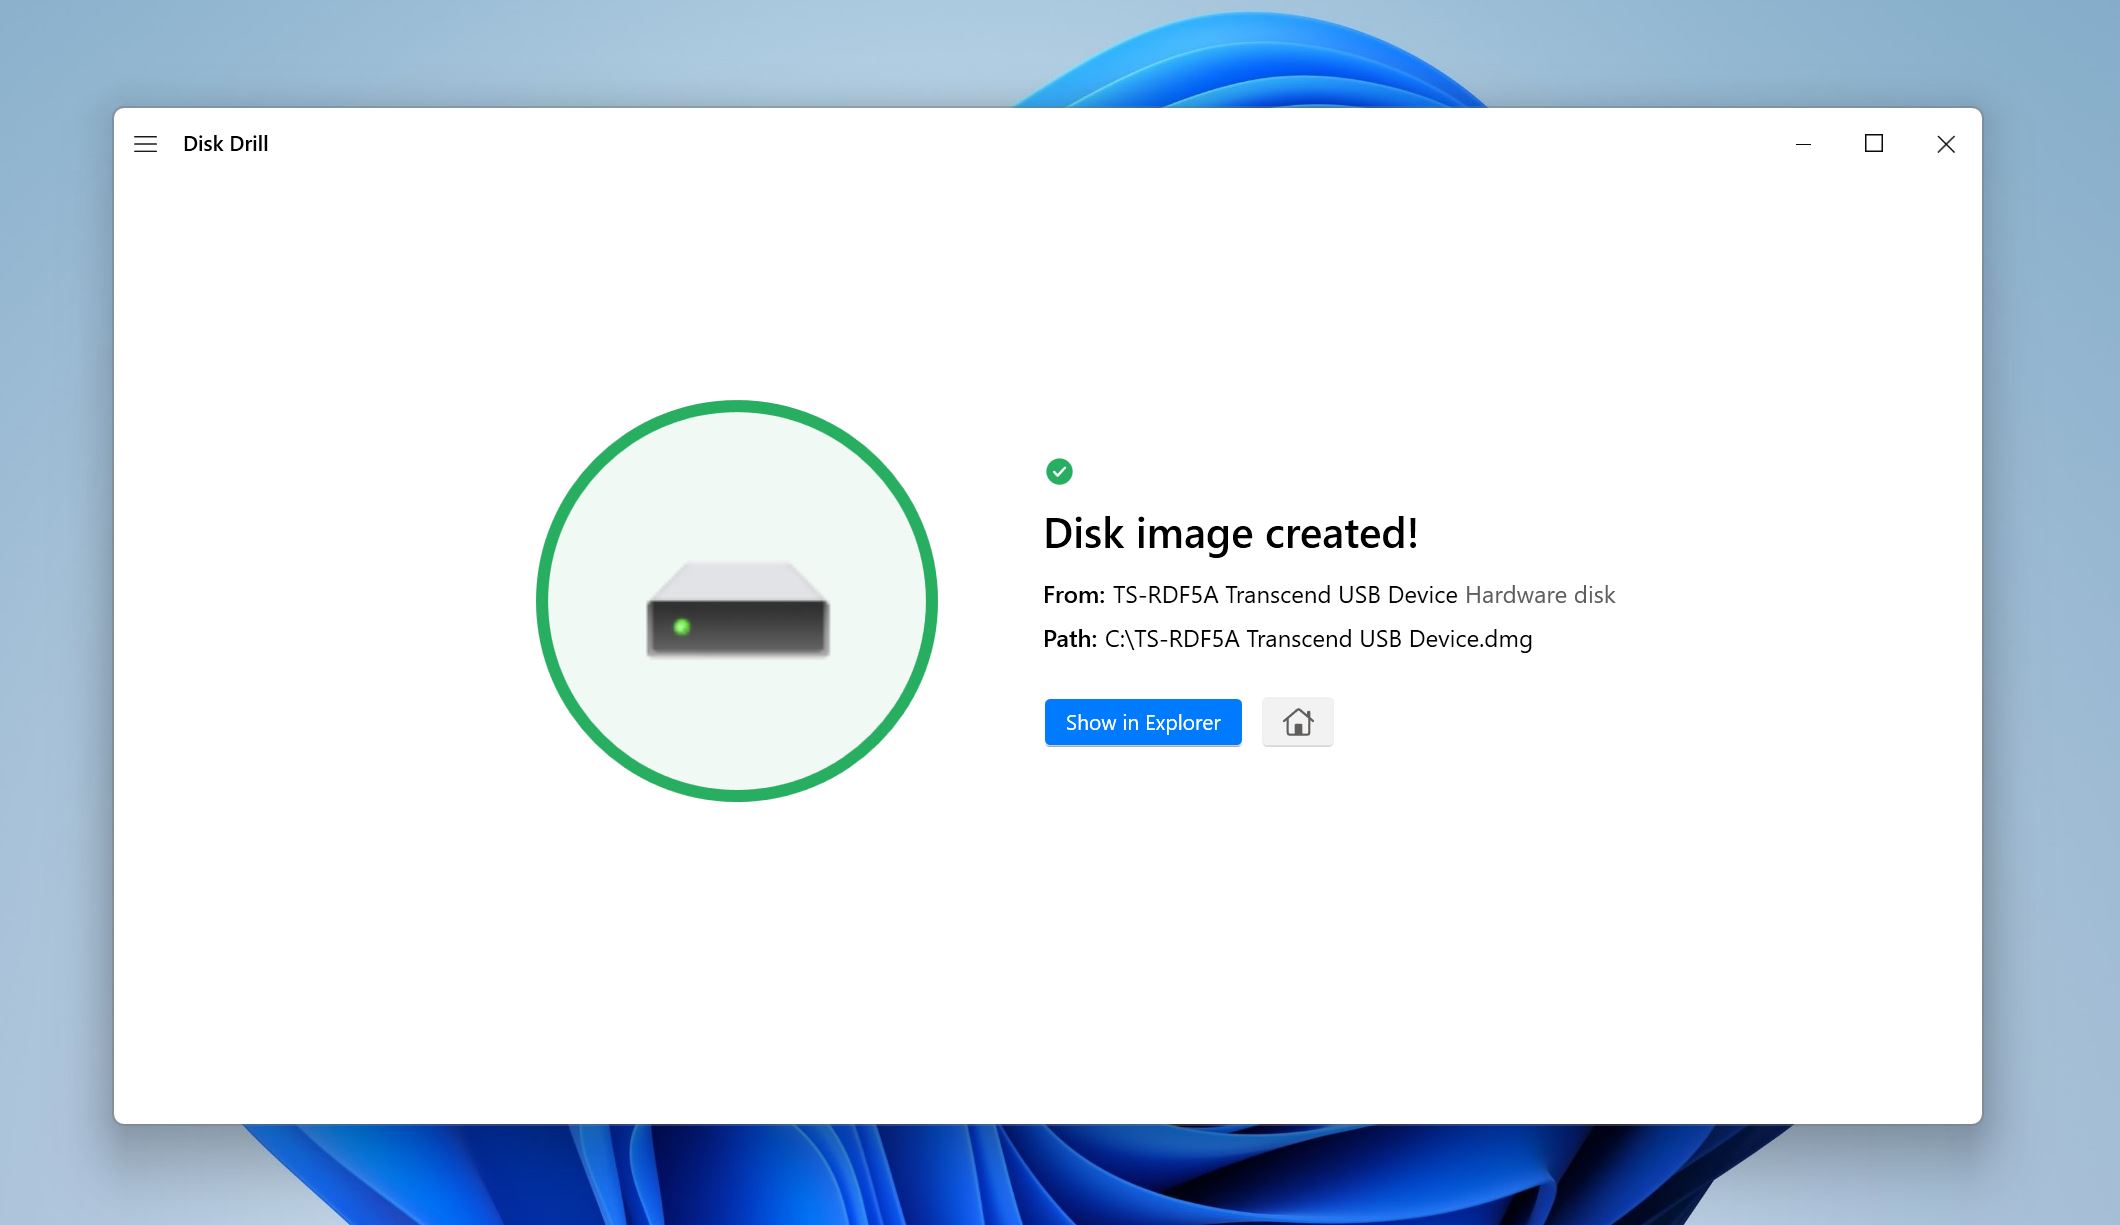 Disk Drill image creation complete screen.